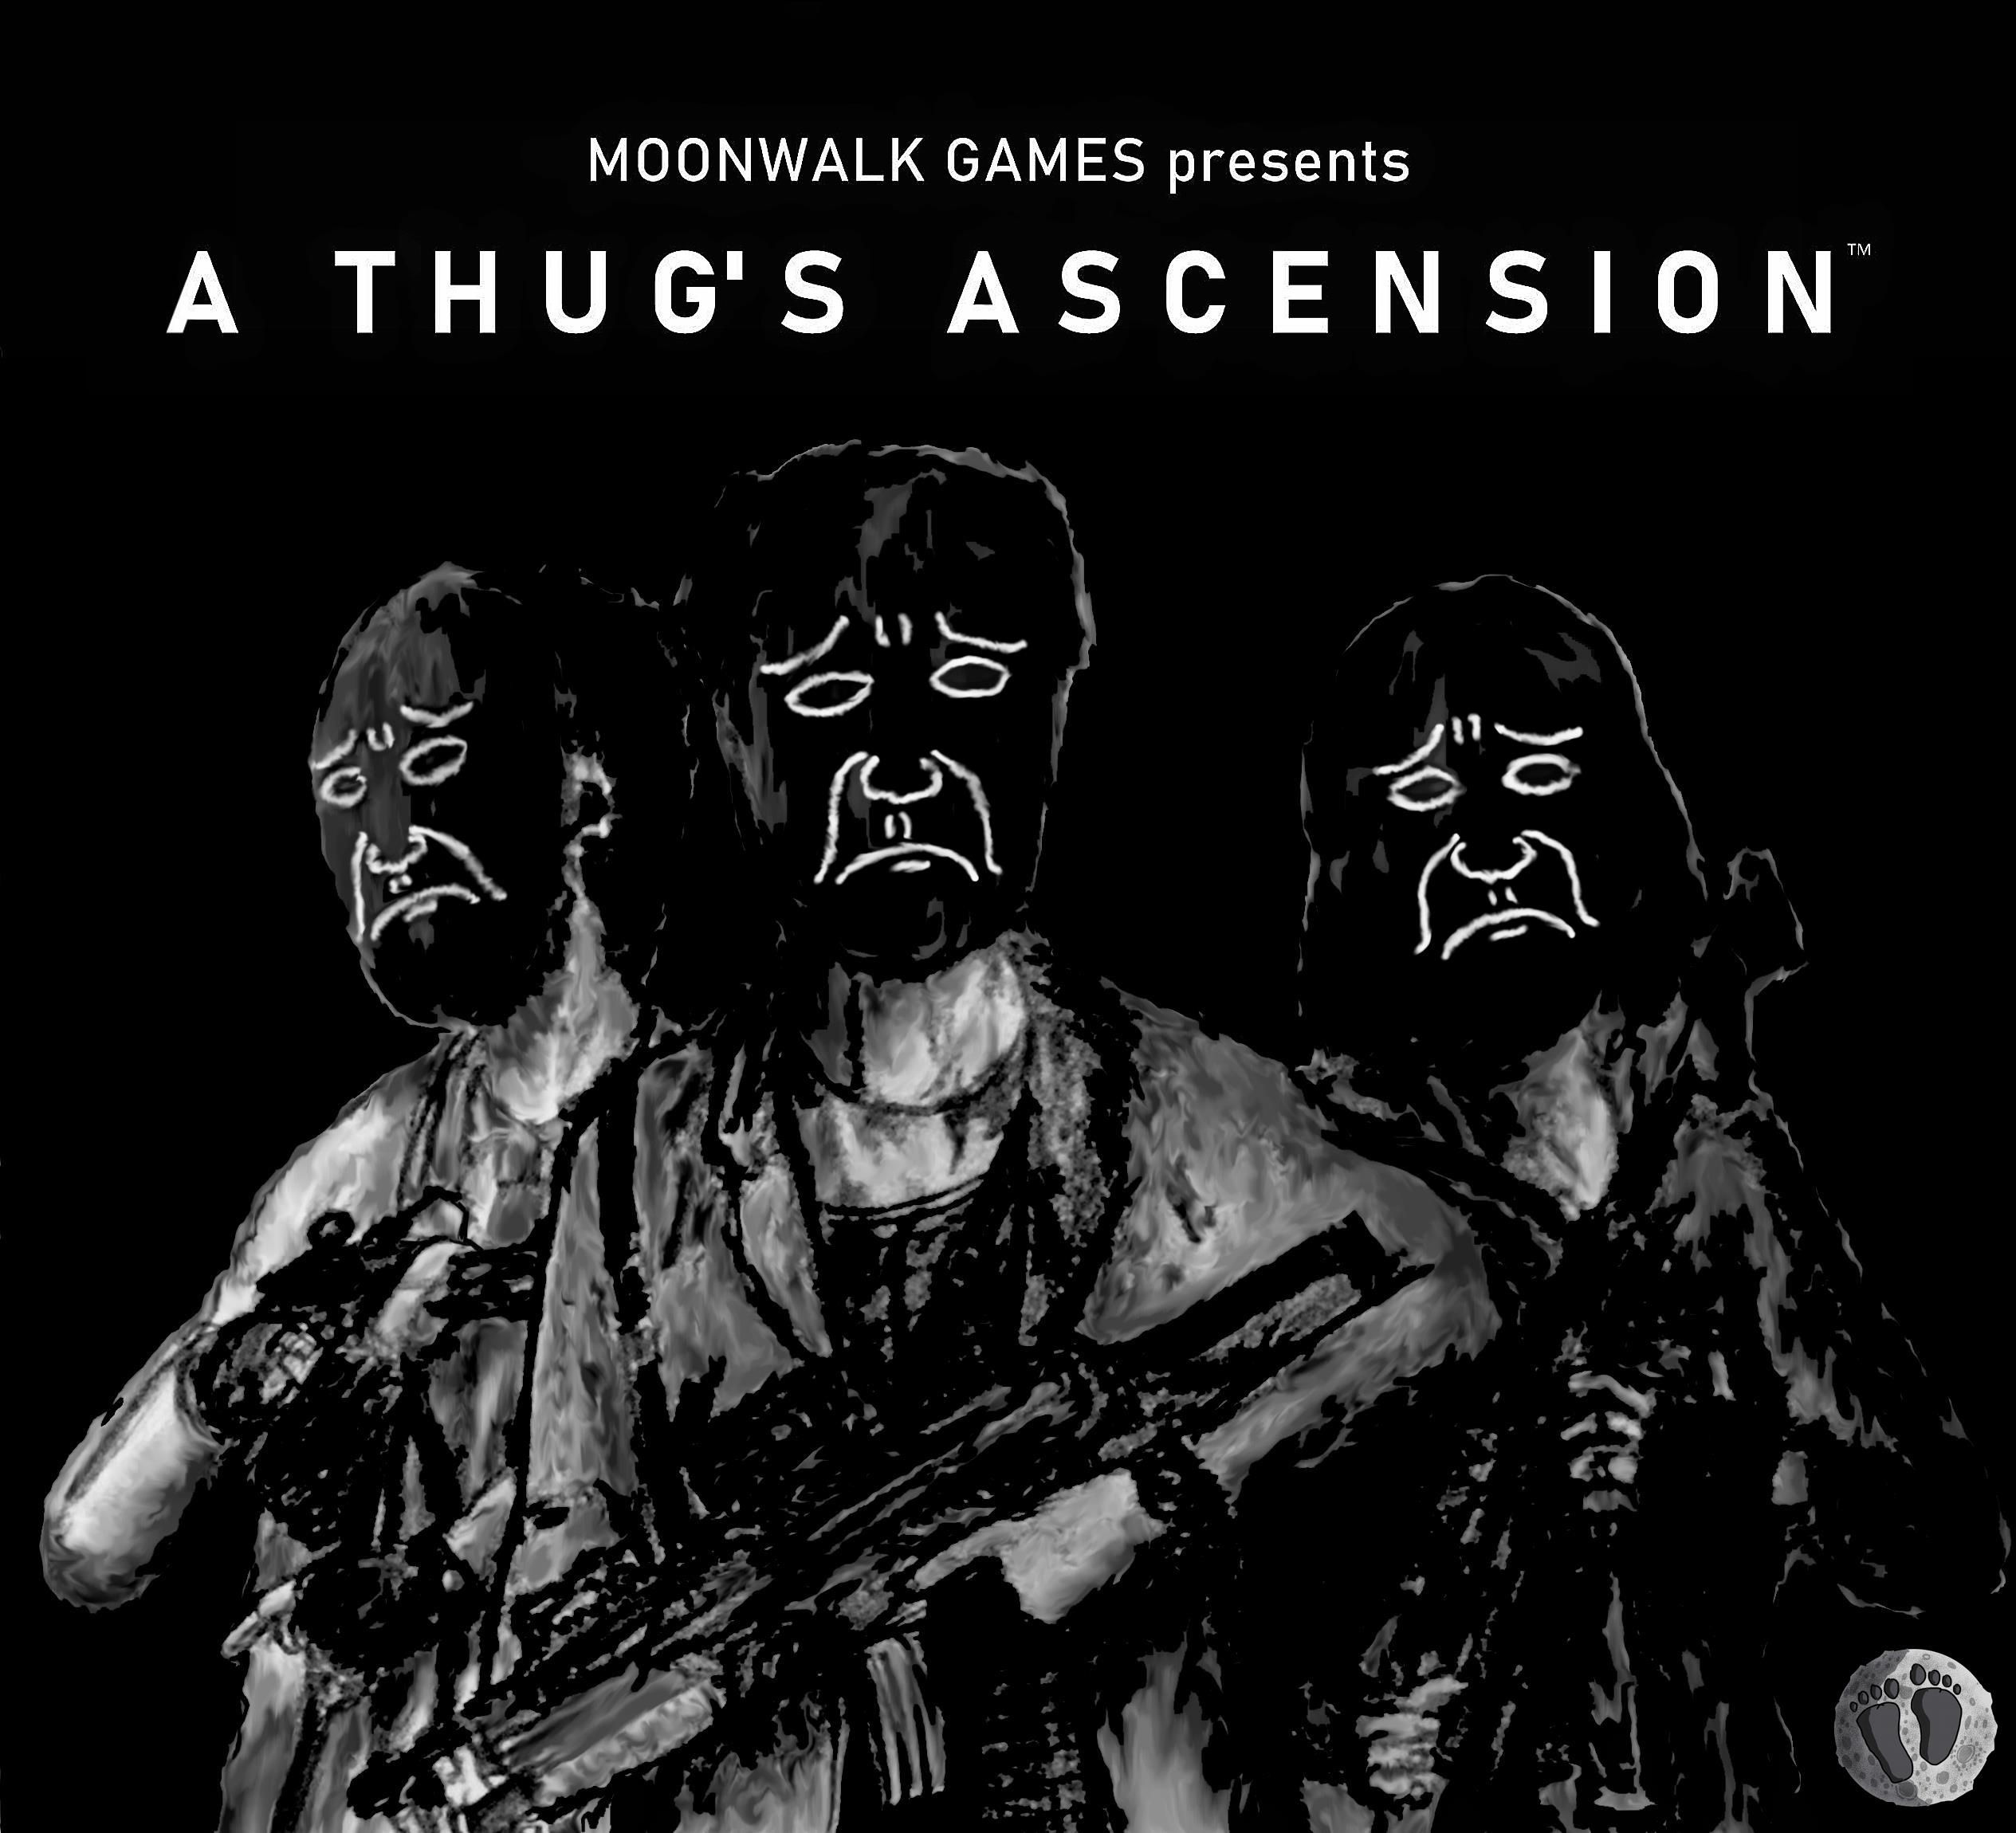 A Thug's Ascension by Moonwalk Games, coming soon